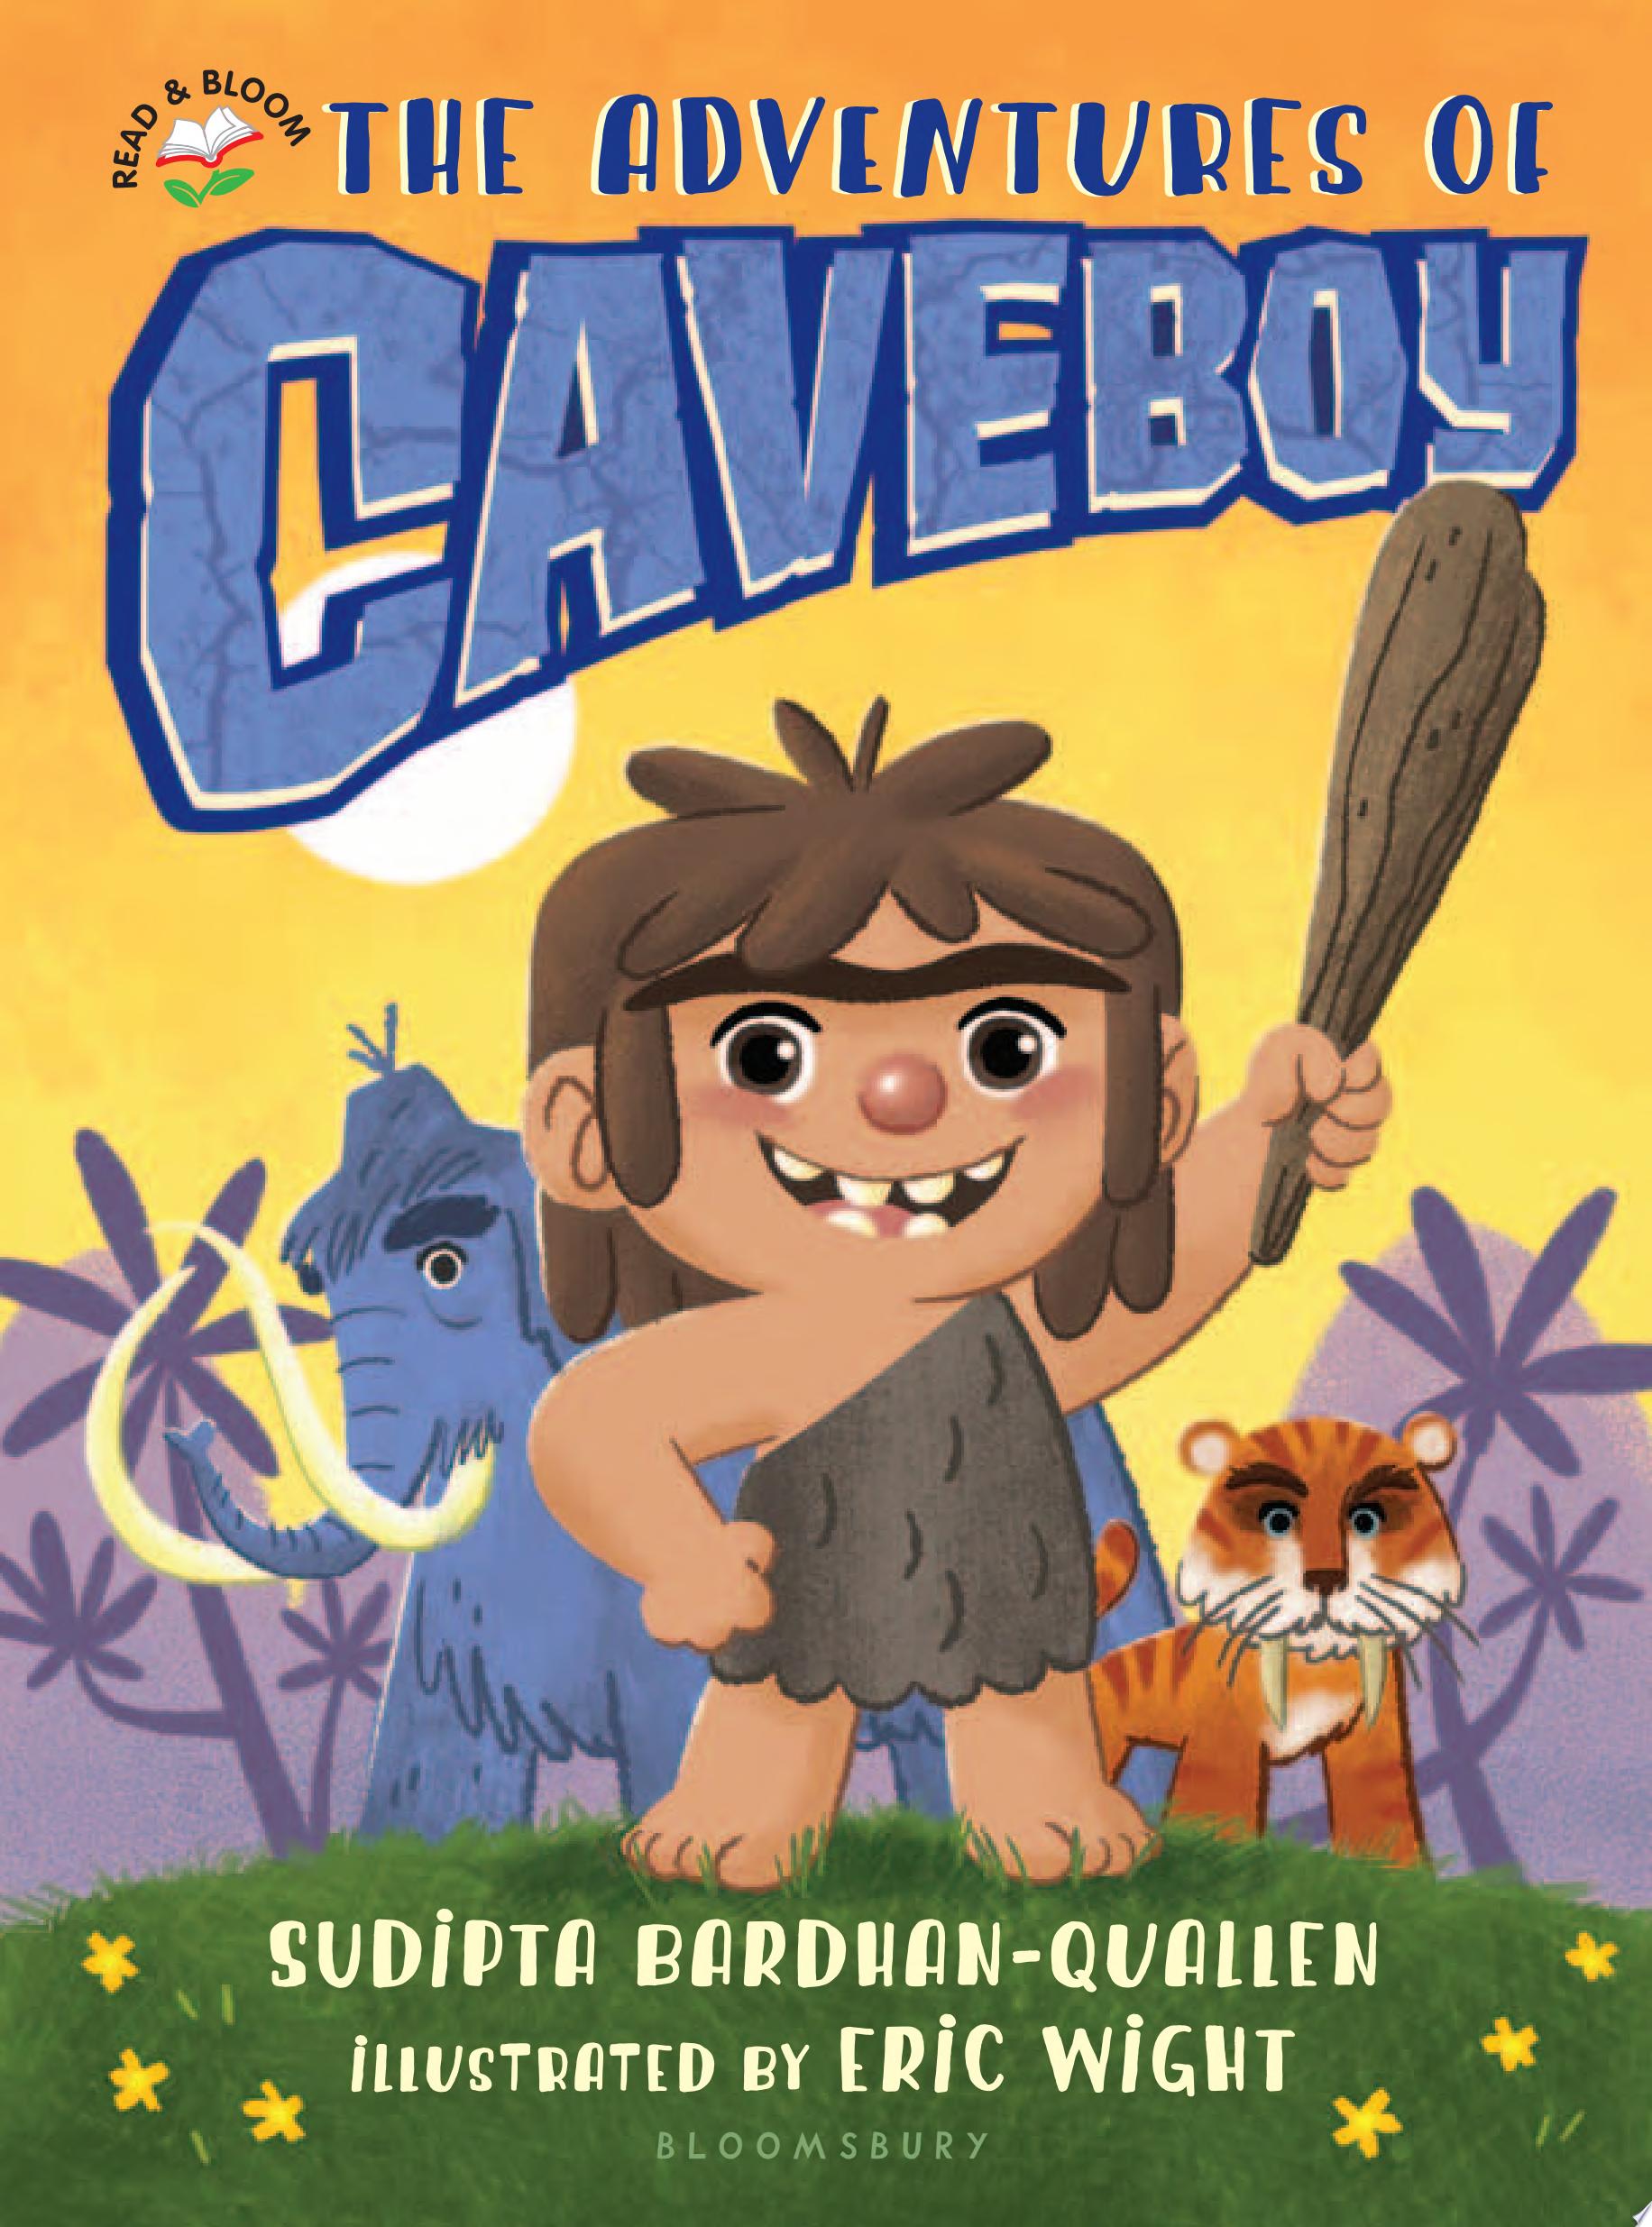 Image for "The Adventures of Caveboy"